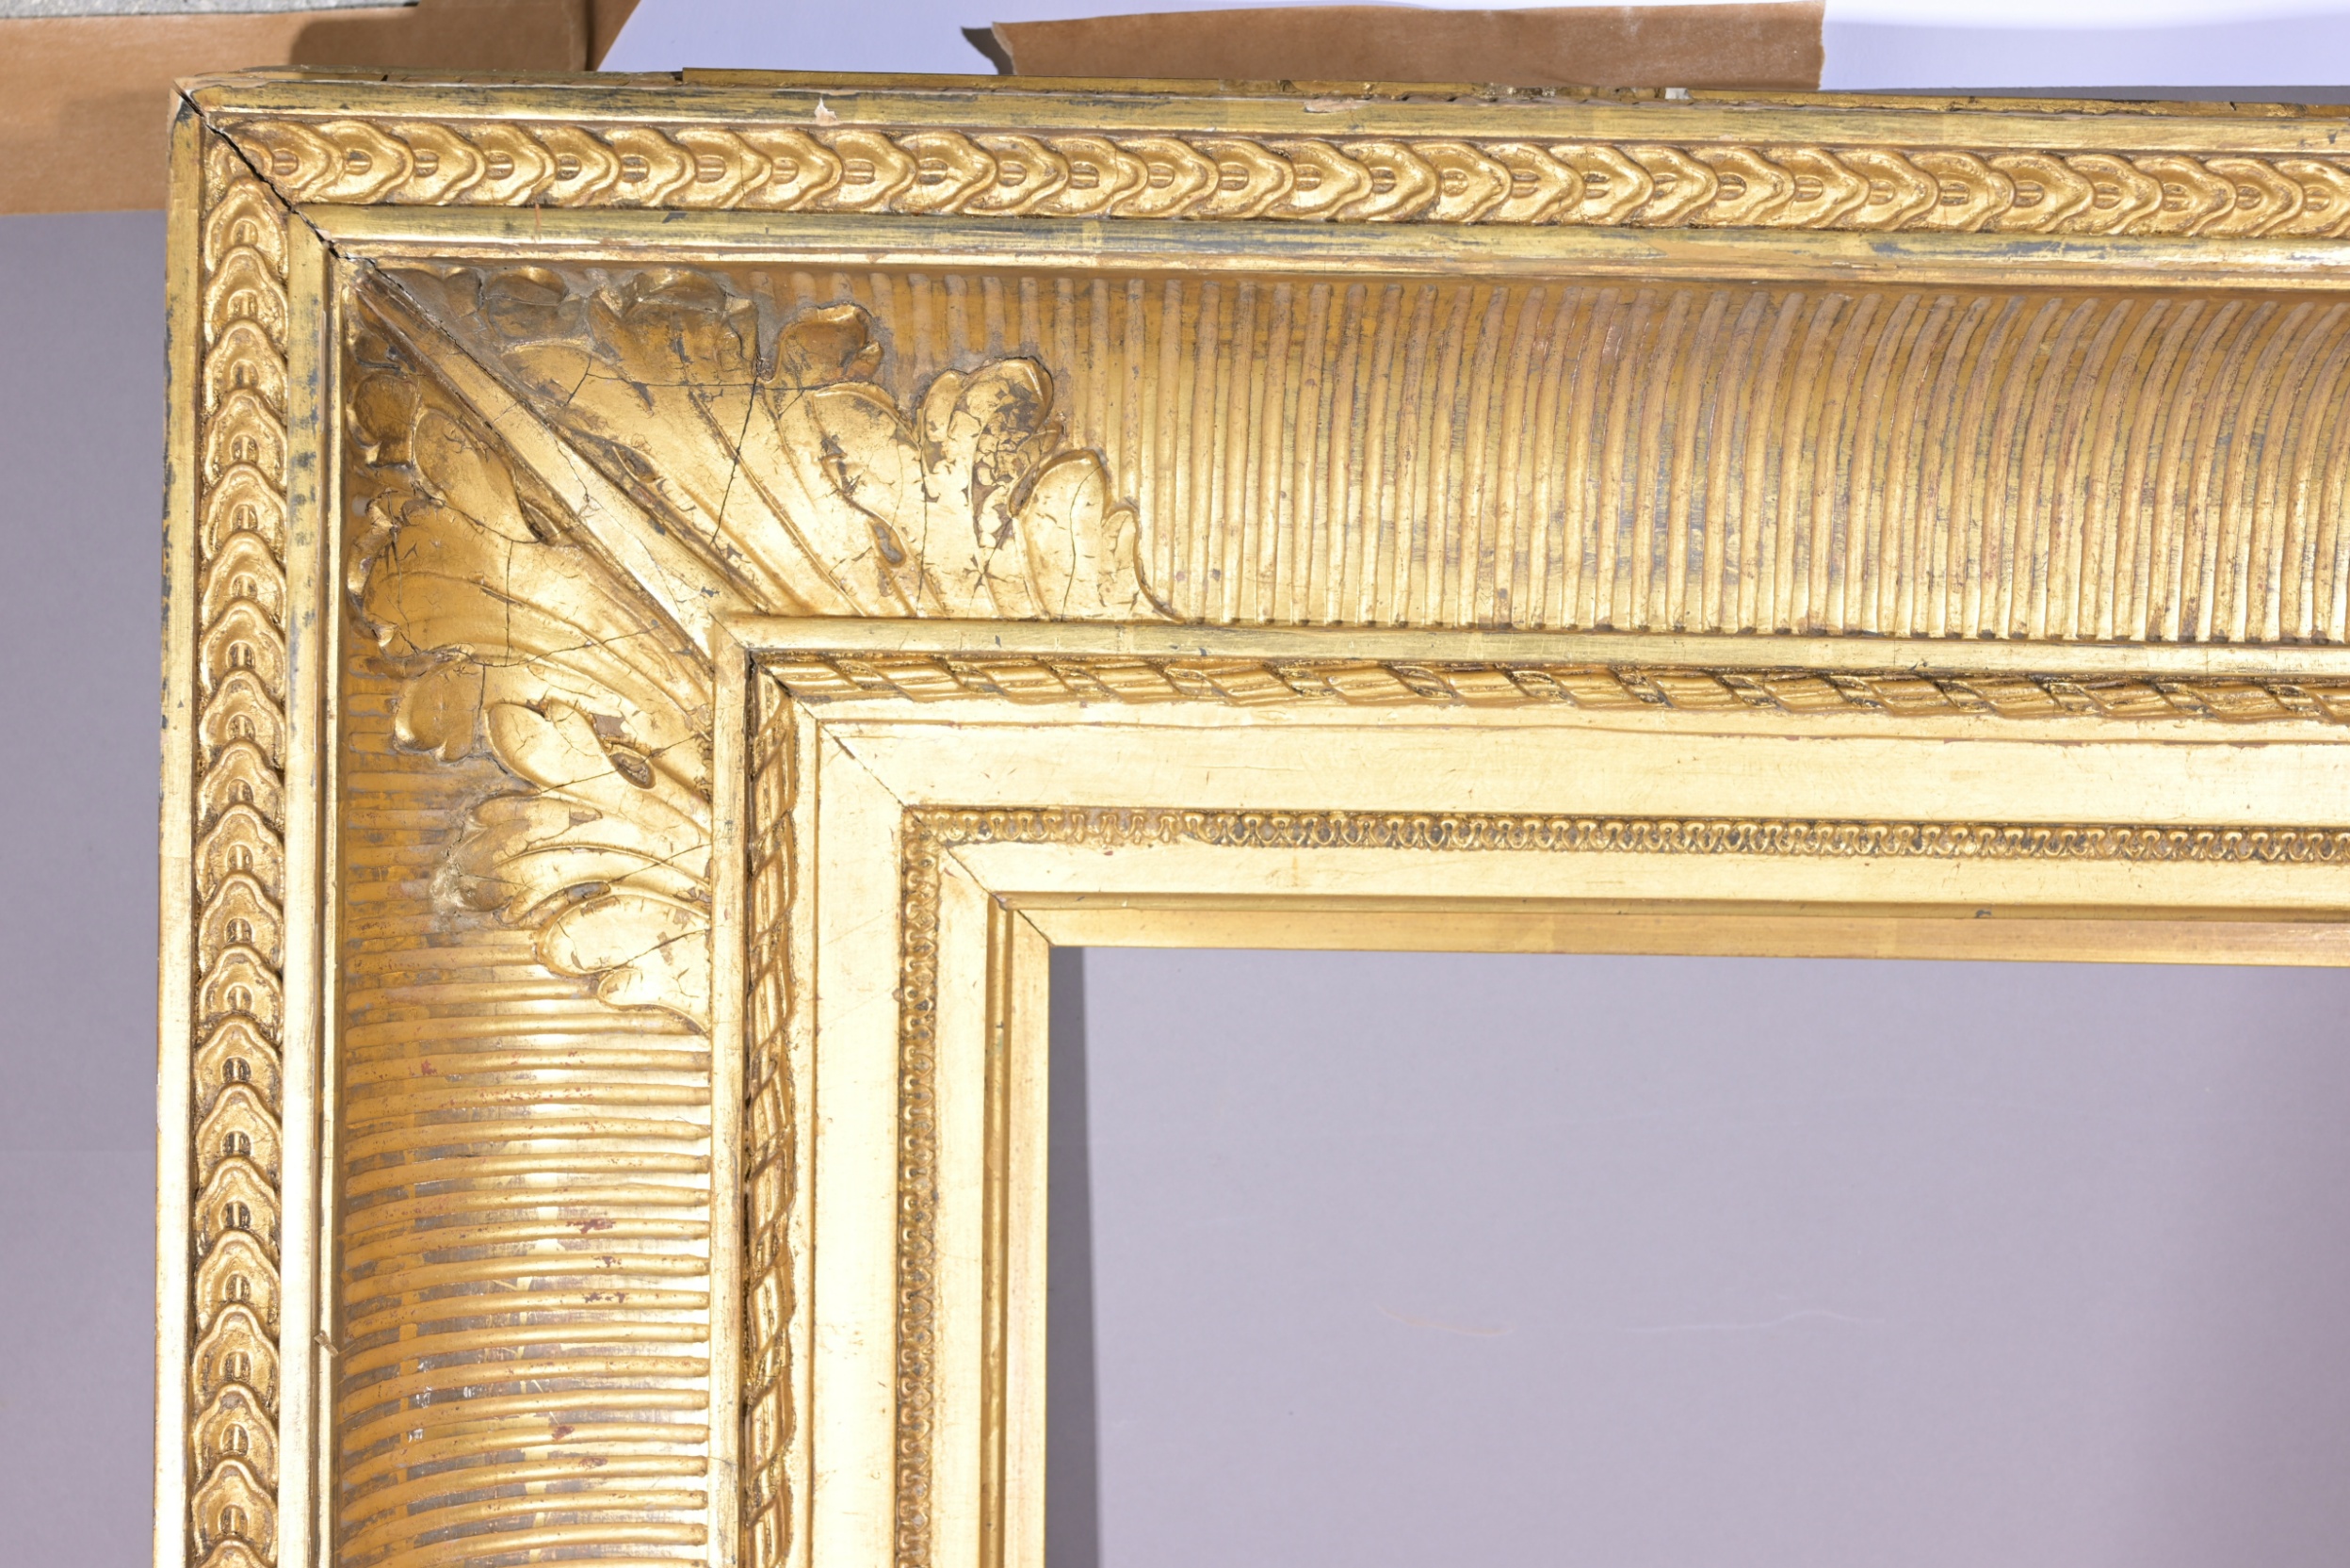 Large 19th C. French School Frame - 40 x 32.5 - Image 3 of 9